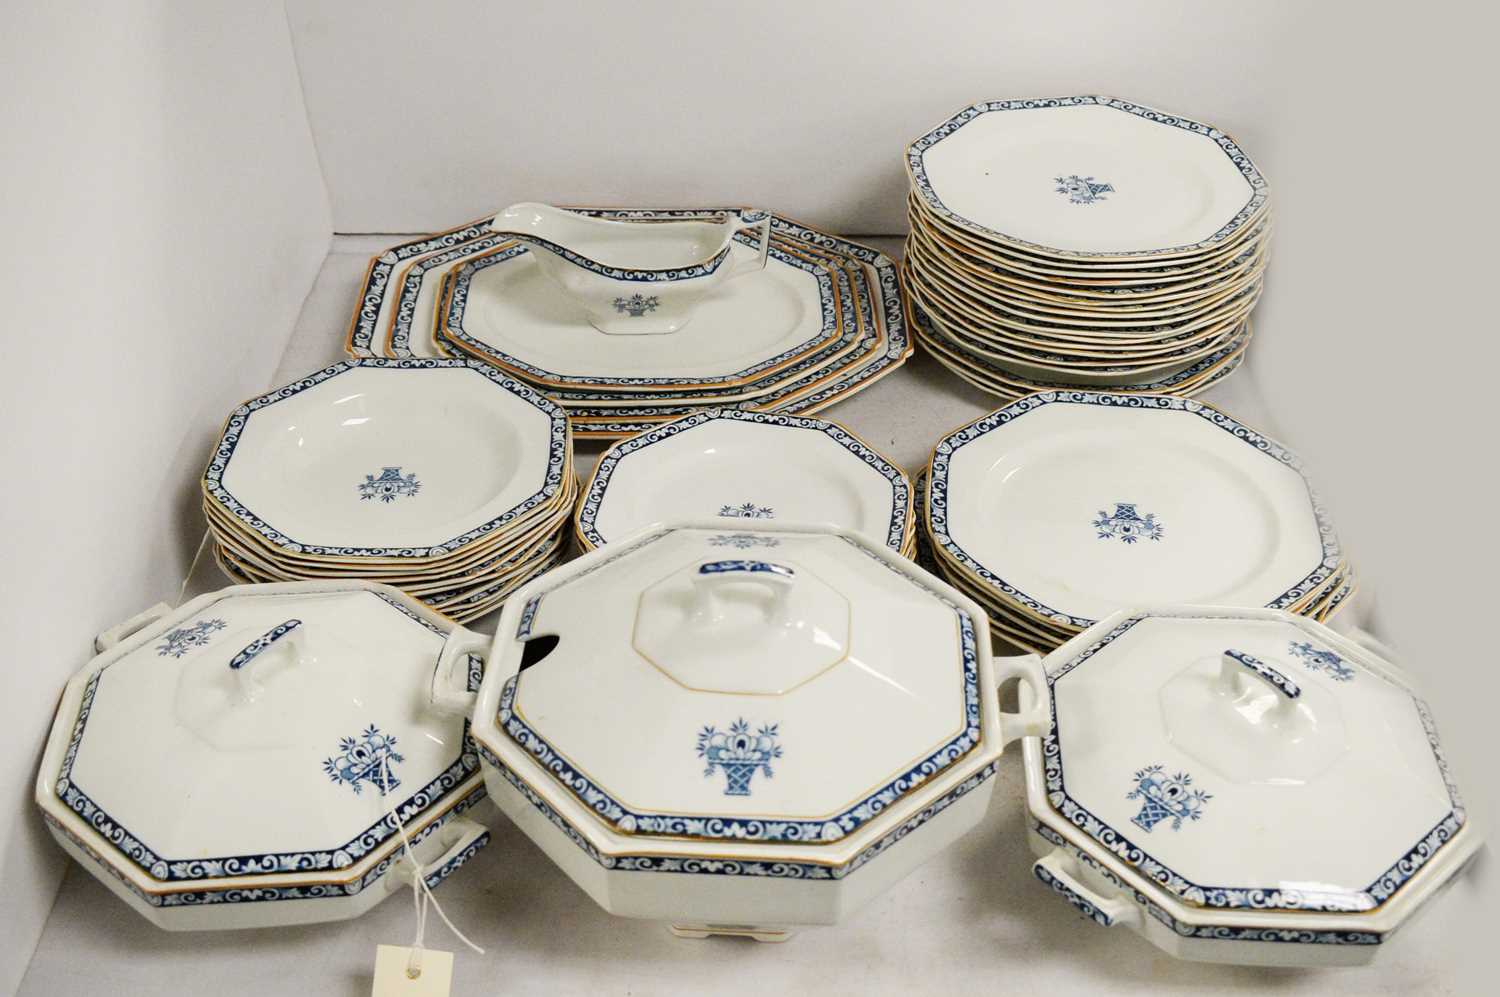 A Wood & Sons Woods Ware ‘Stuart’ blue and white part dinner service